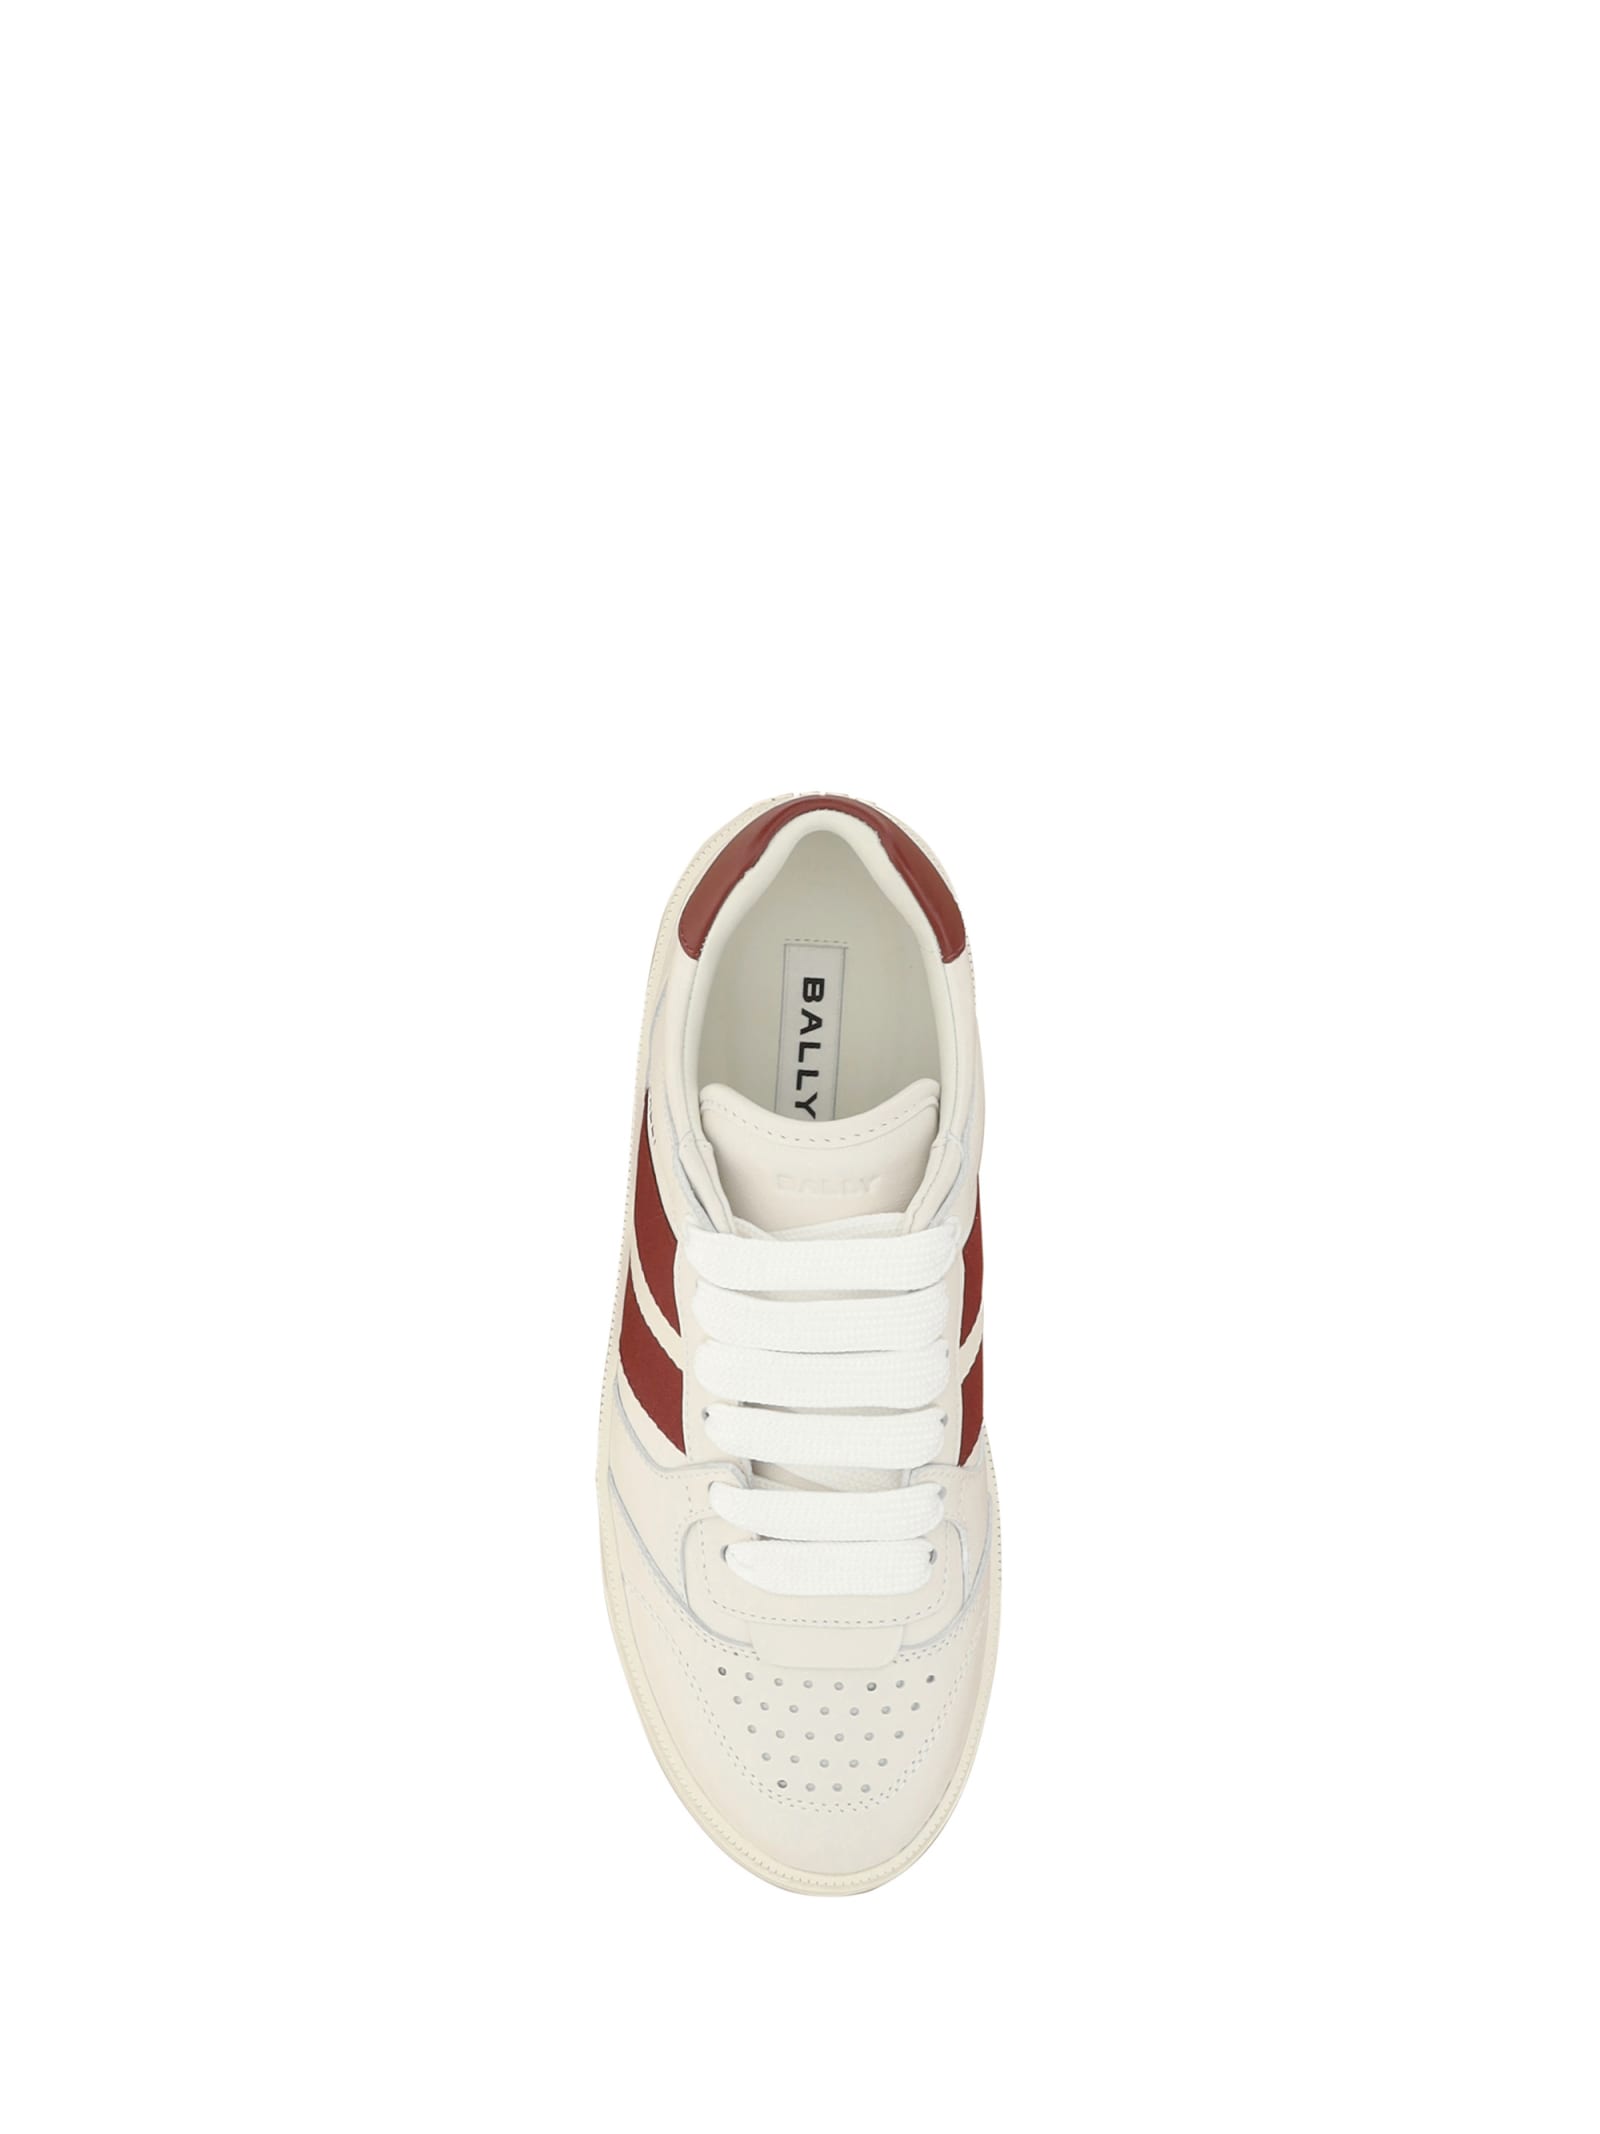 Bally Rebby panelled sneakers - White